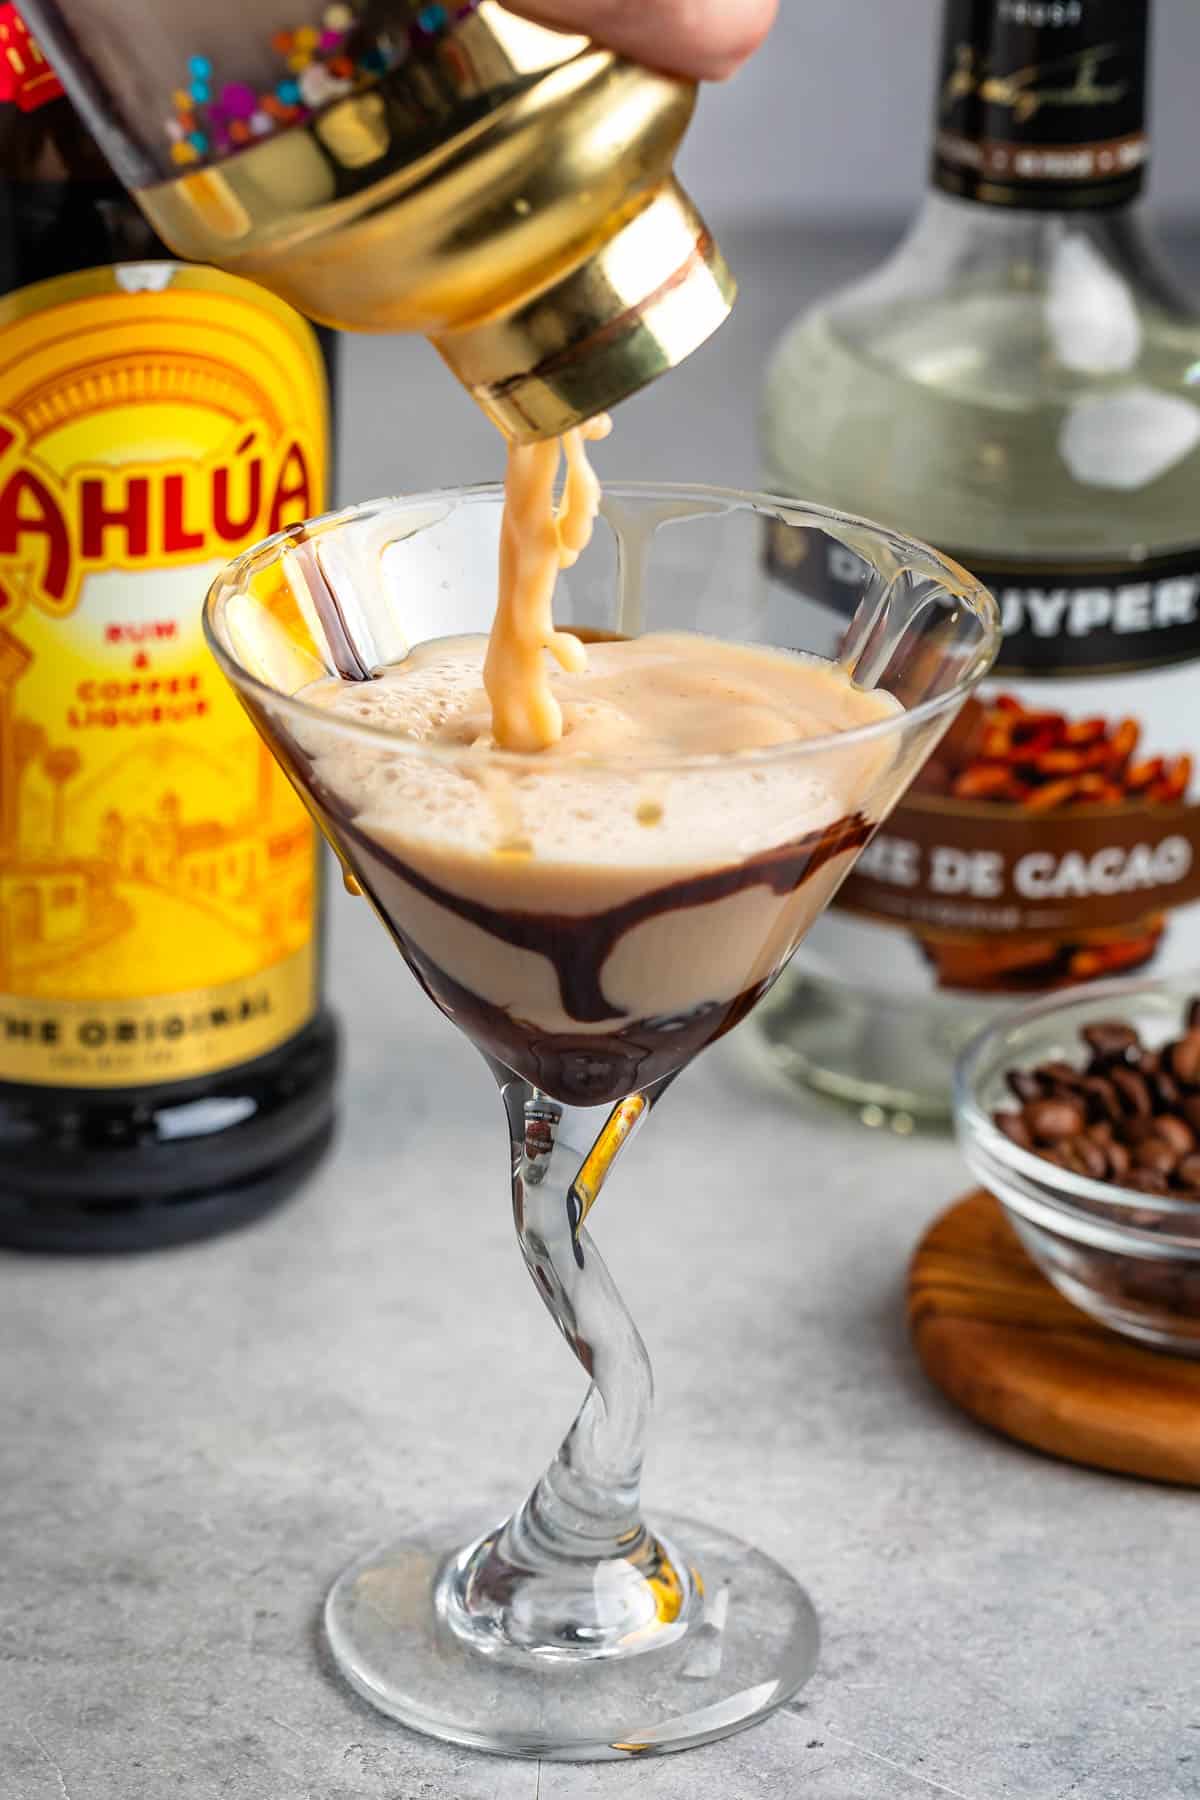 tall clear glass with chocolate and mocha martini inside.